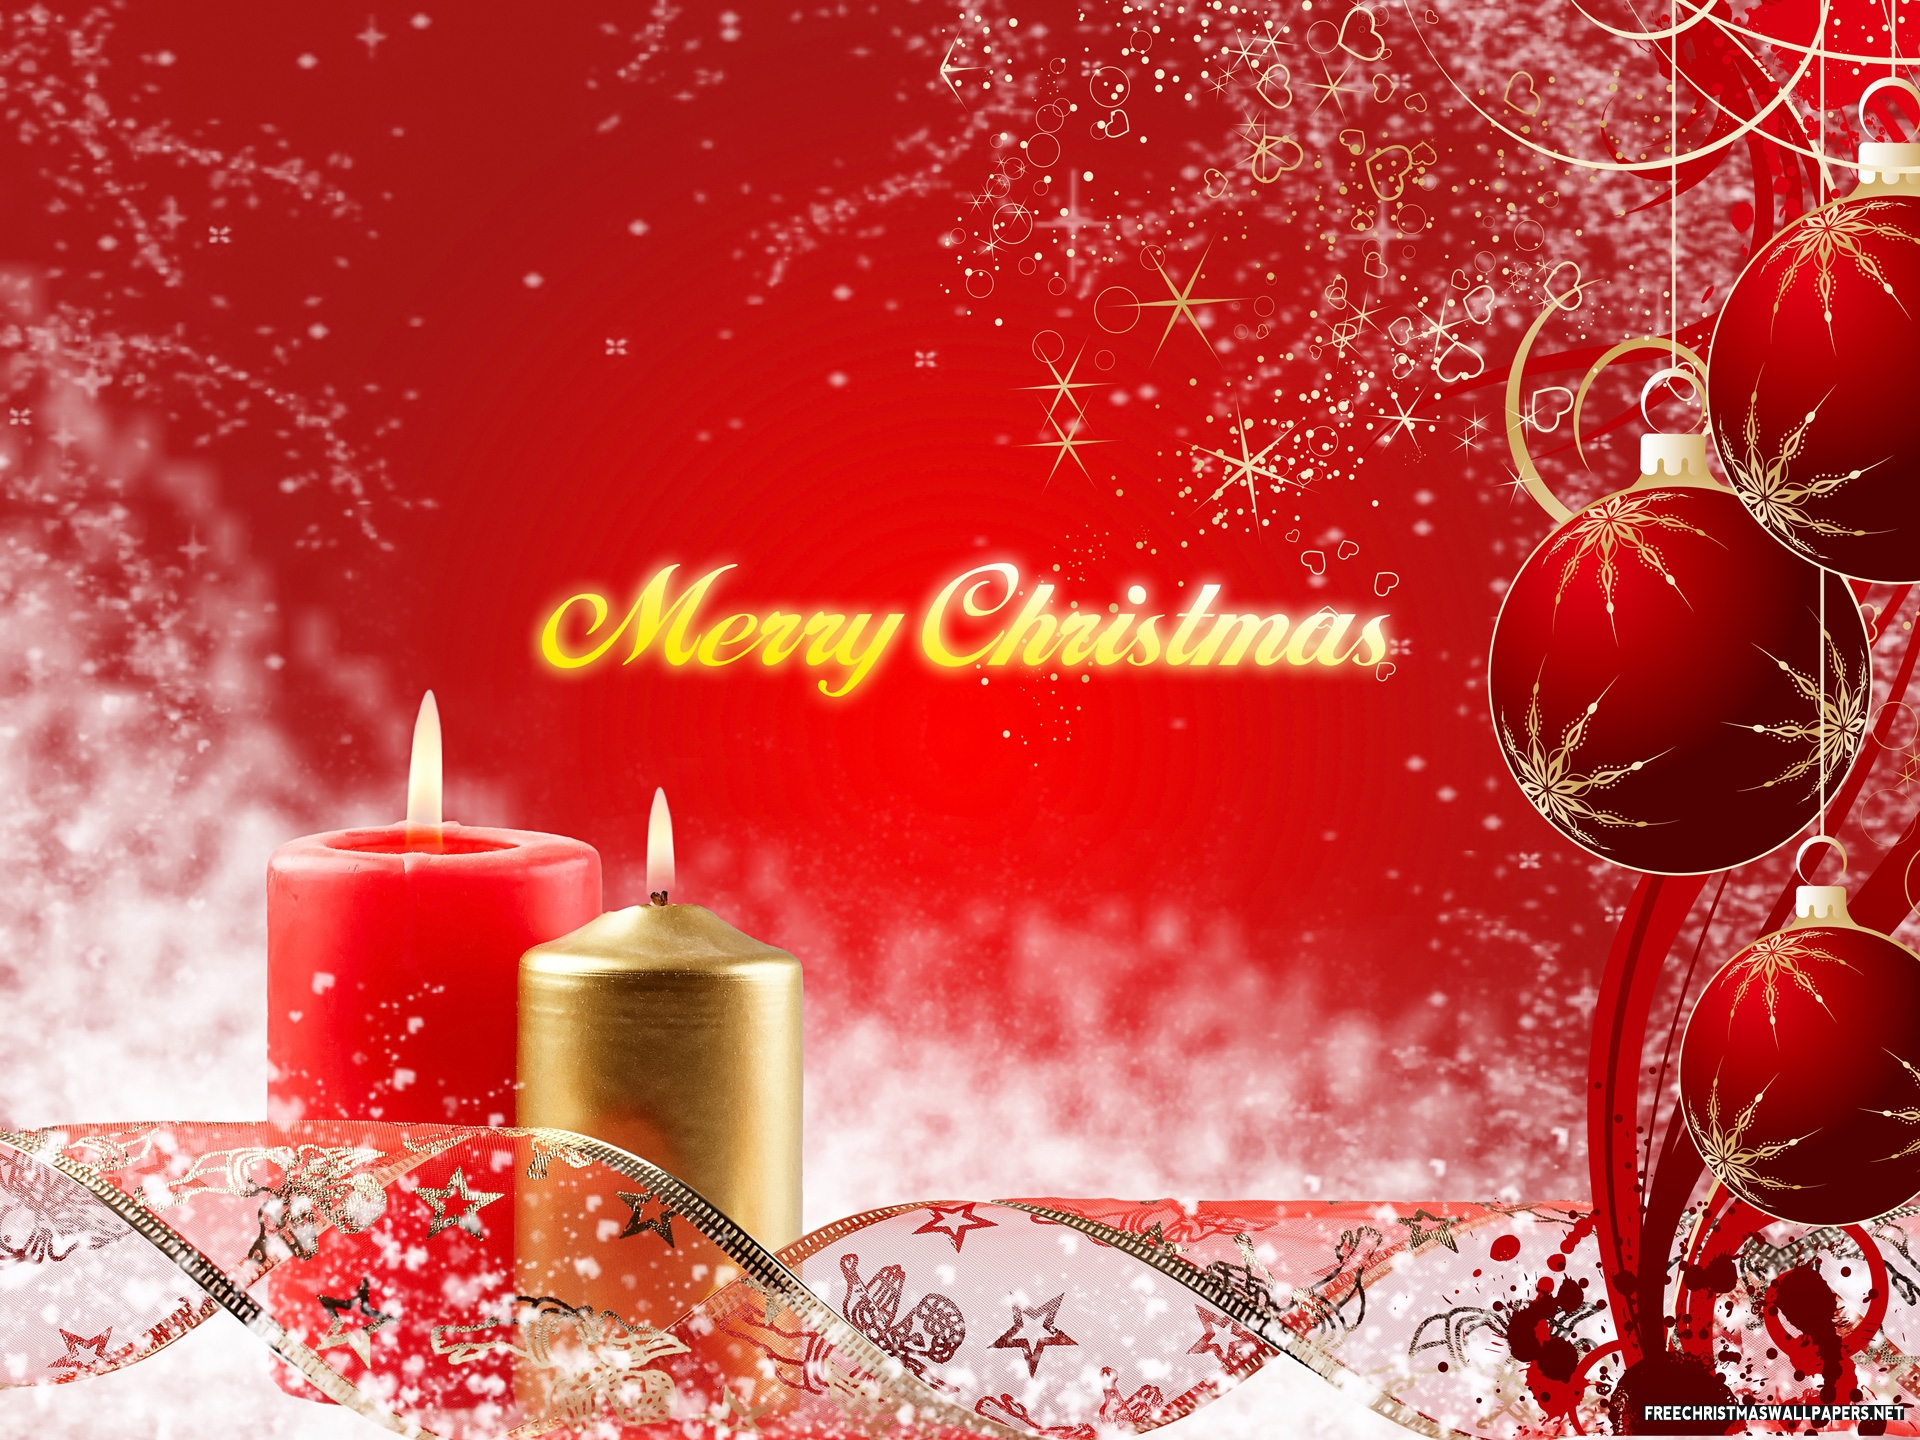 wishes-for-a-very-merry-christmas-and-a-happy-new-year-for-2014